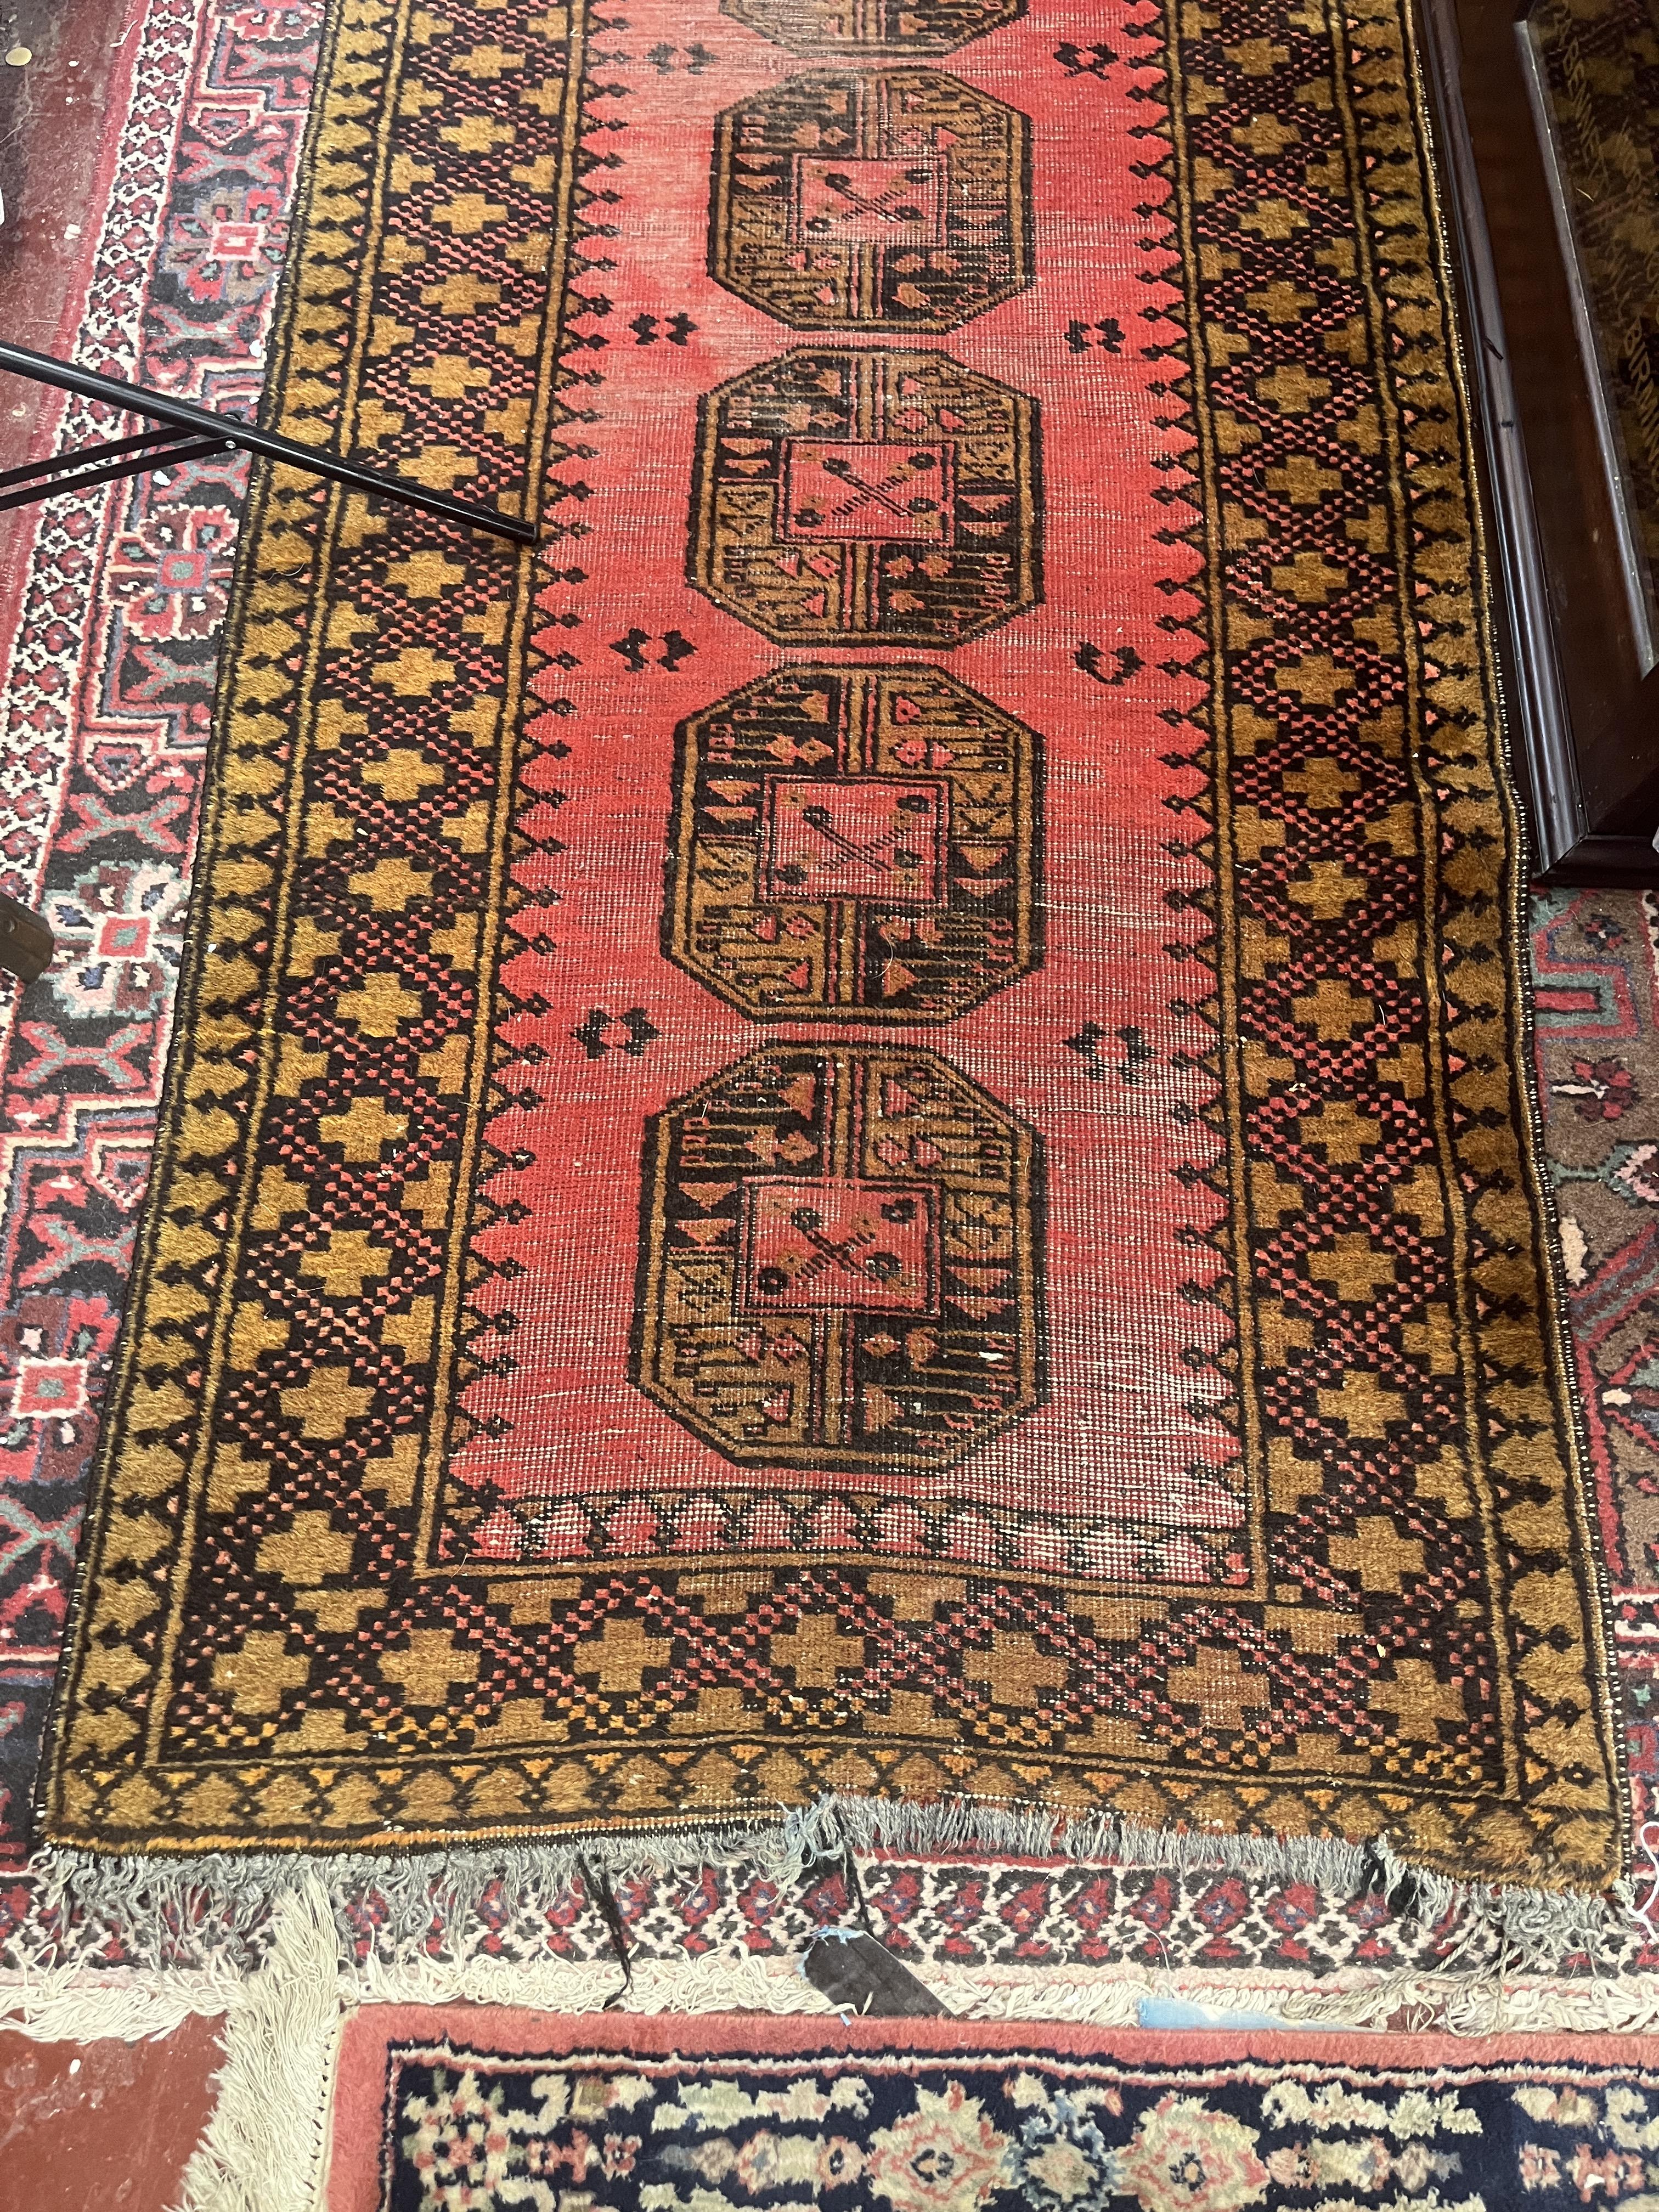 Large red patterned runner - Approx size: 300cm x 89cm - Image 2 of 4